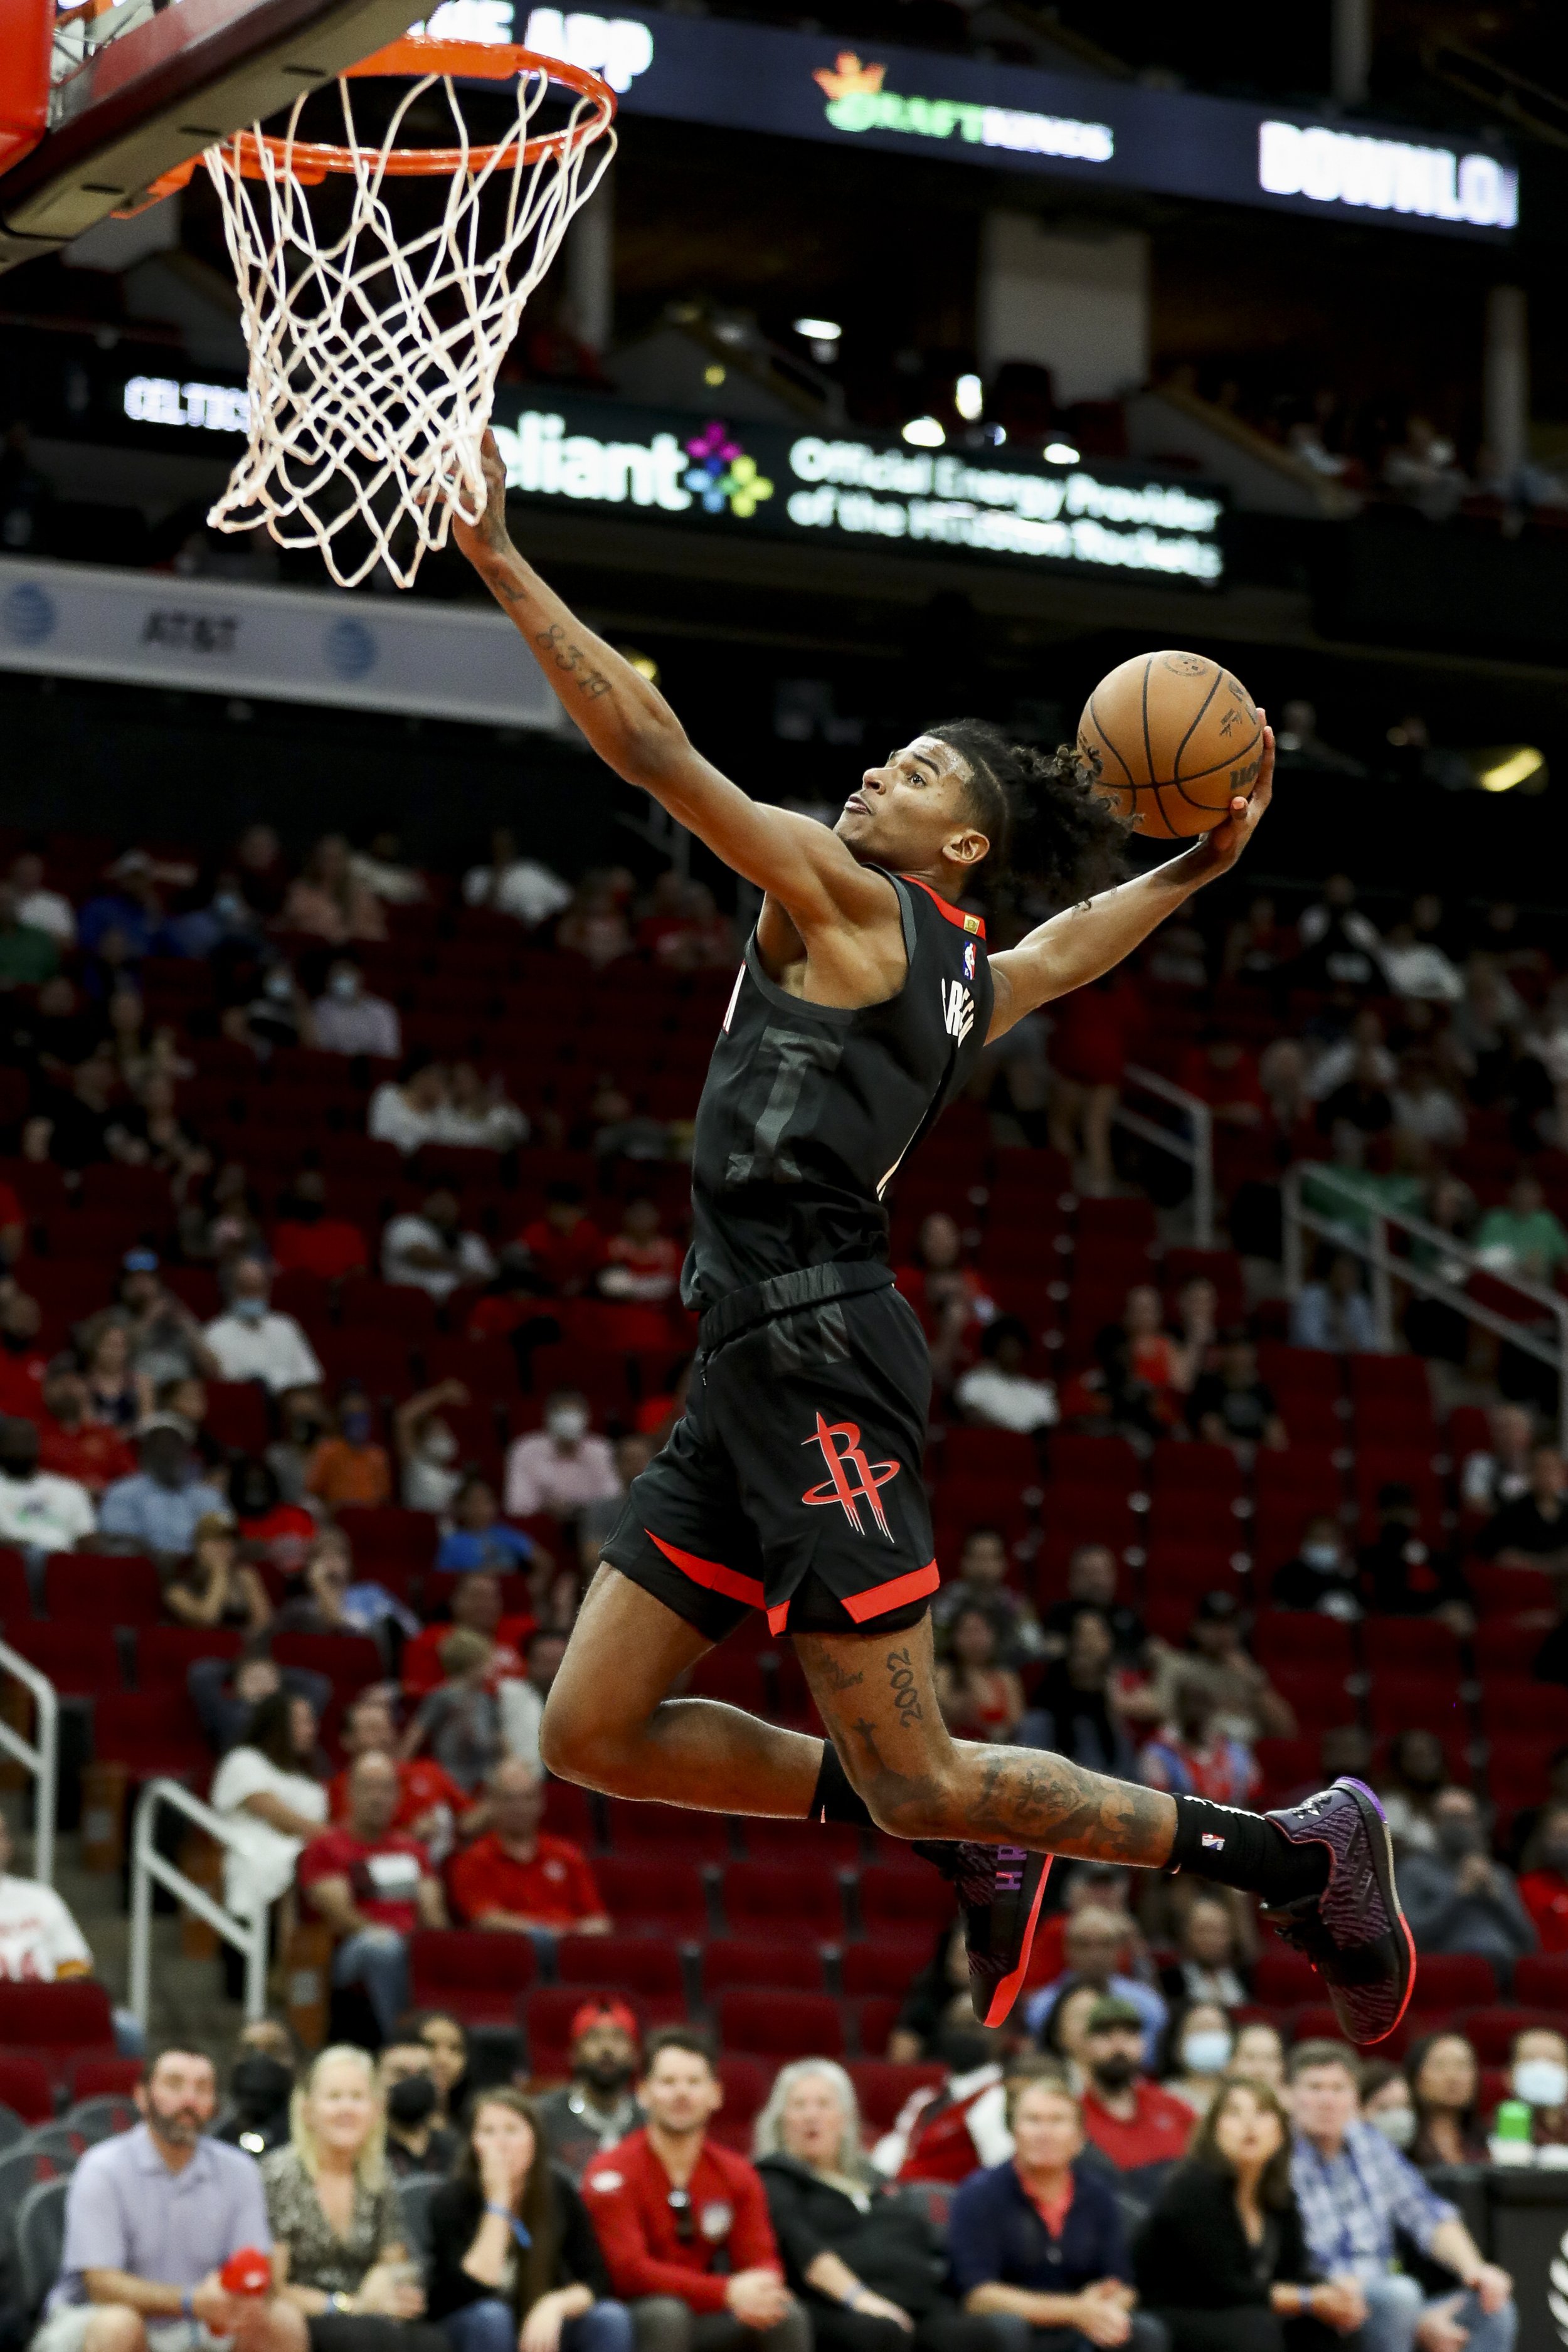  Houston Rockets guard Jalen Green (0) dunks the ball against the Boston Celtics during the second half of an NBA game at the Toyota Center on Sunday, Oct. 24, 2021, in Houston. The Celtics won 107-97. 